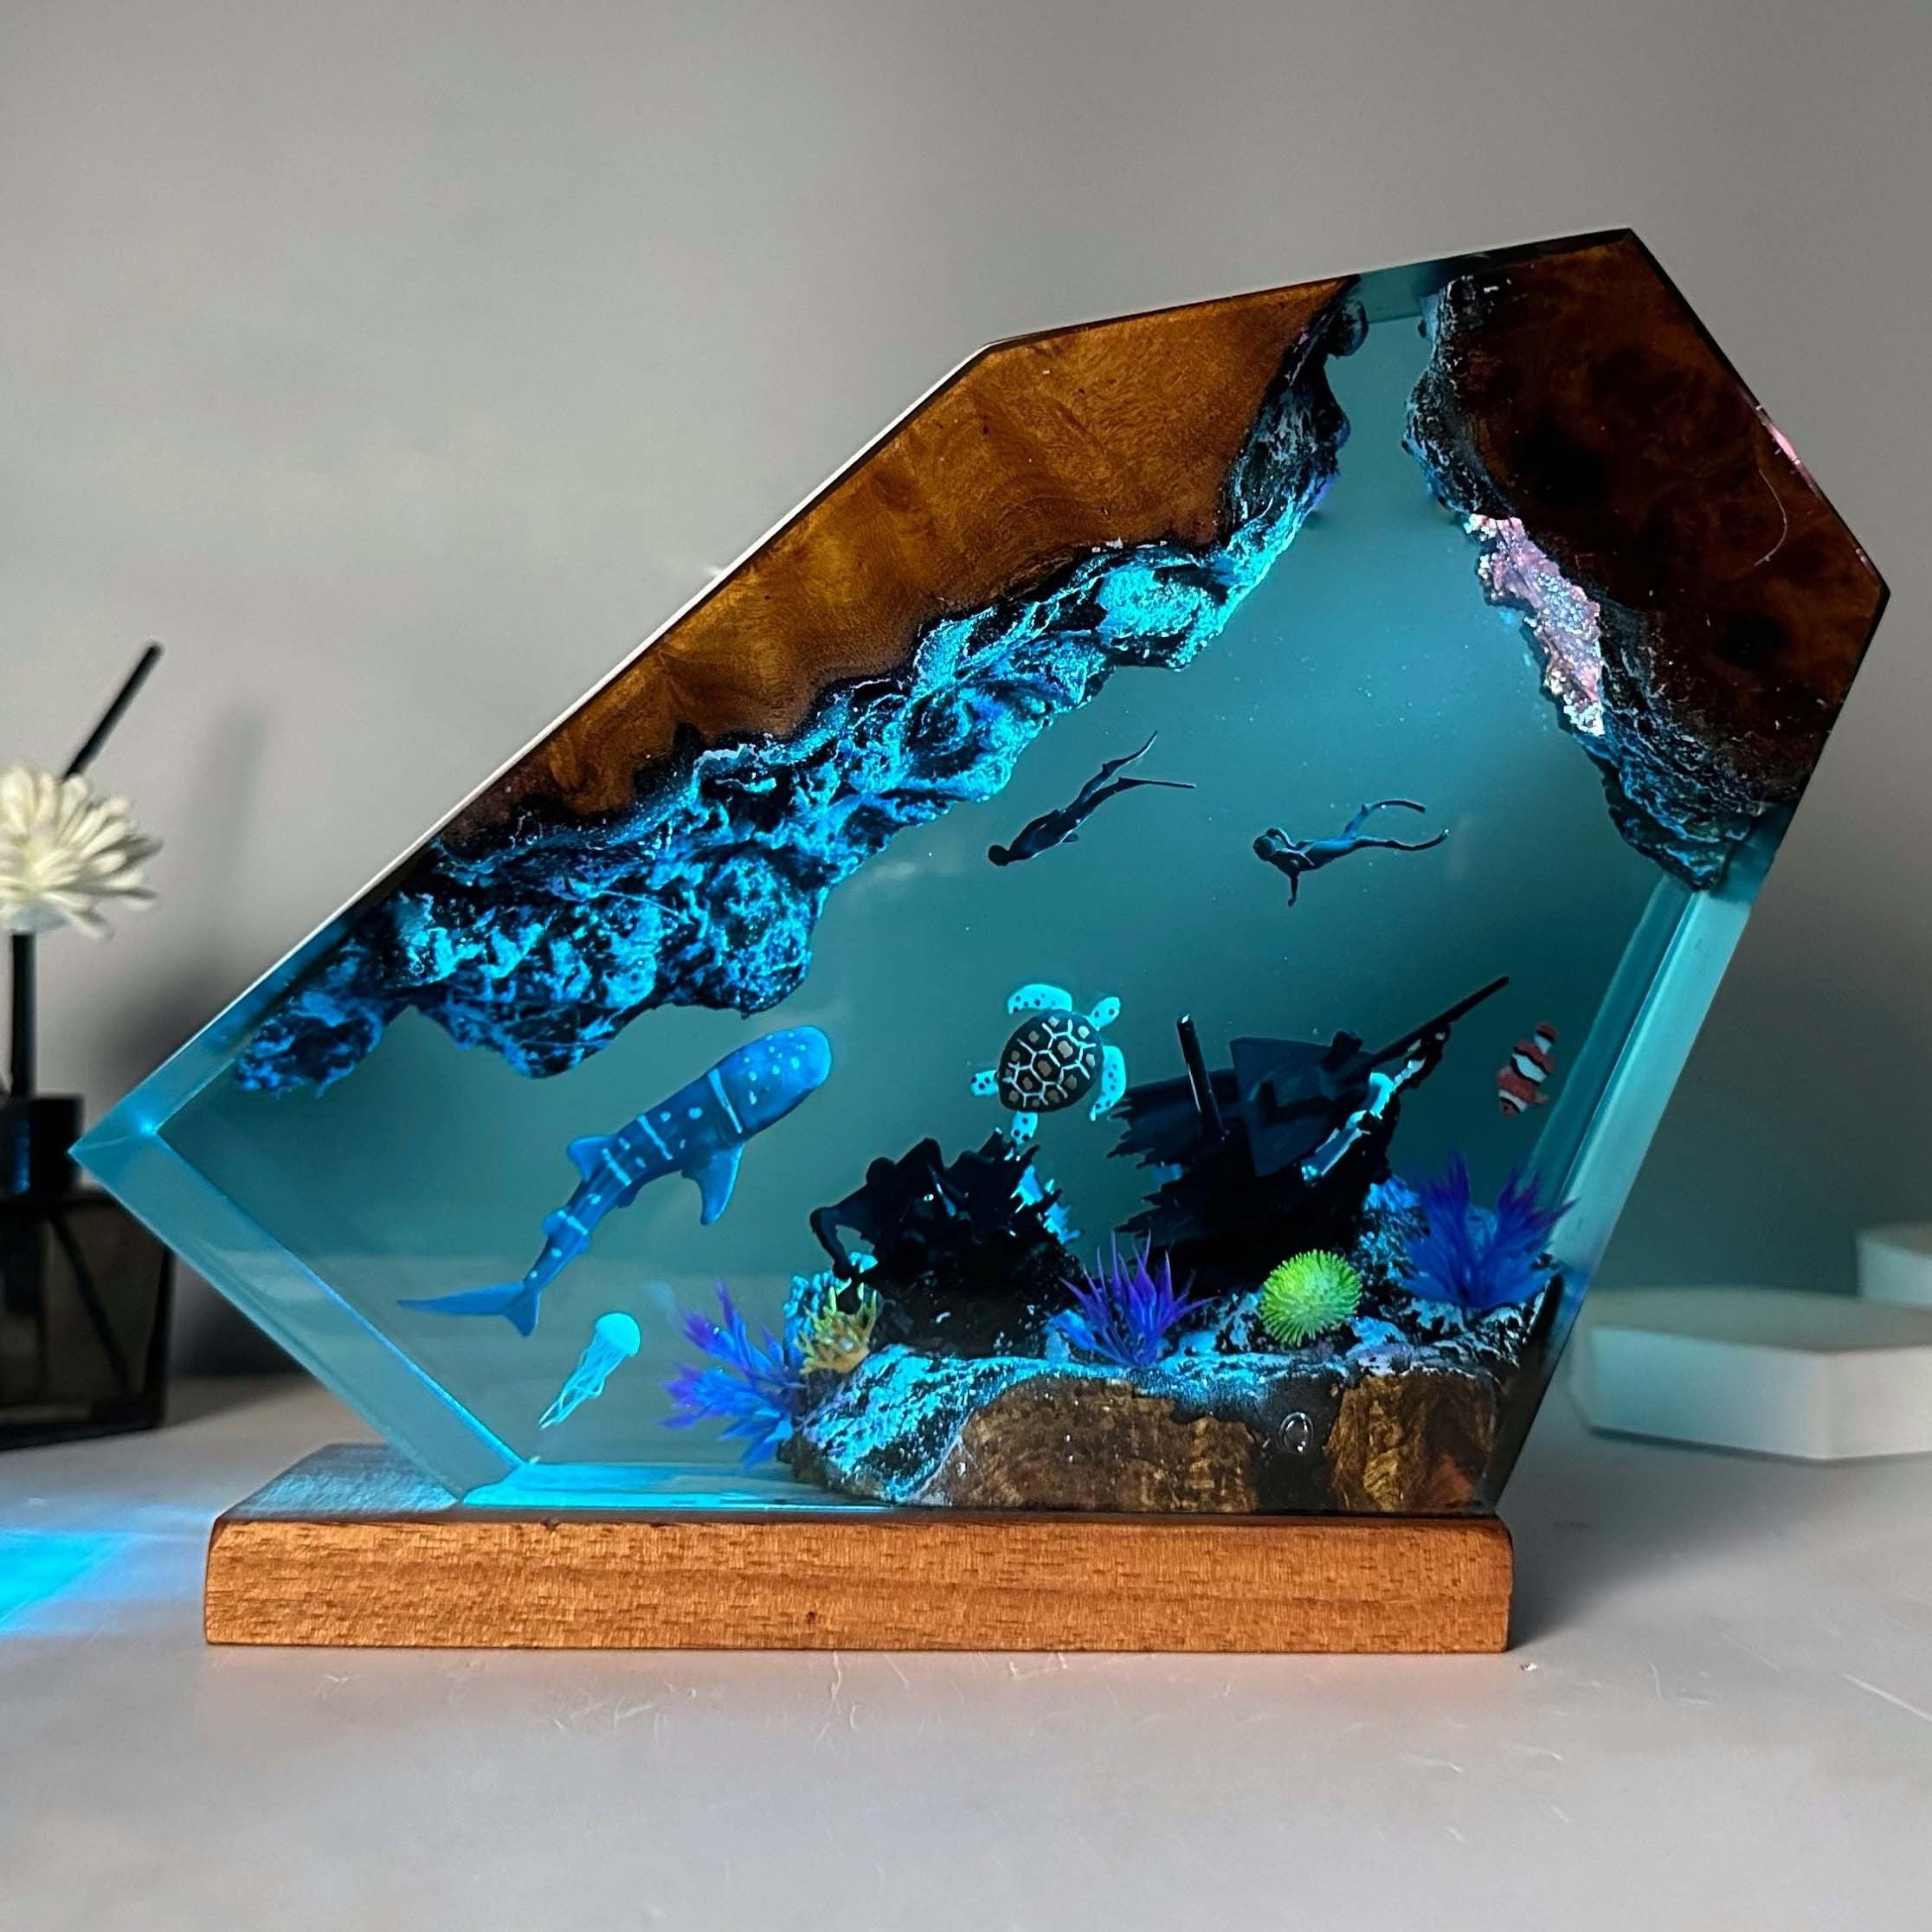 Epoxy Resin Ocean Lamp Whale shark and Couple Diver Night light Resin Wood lamp Free Diving Unique Summer Gift- Home decor NTD